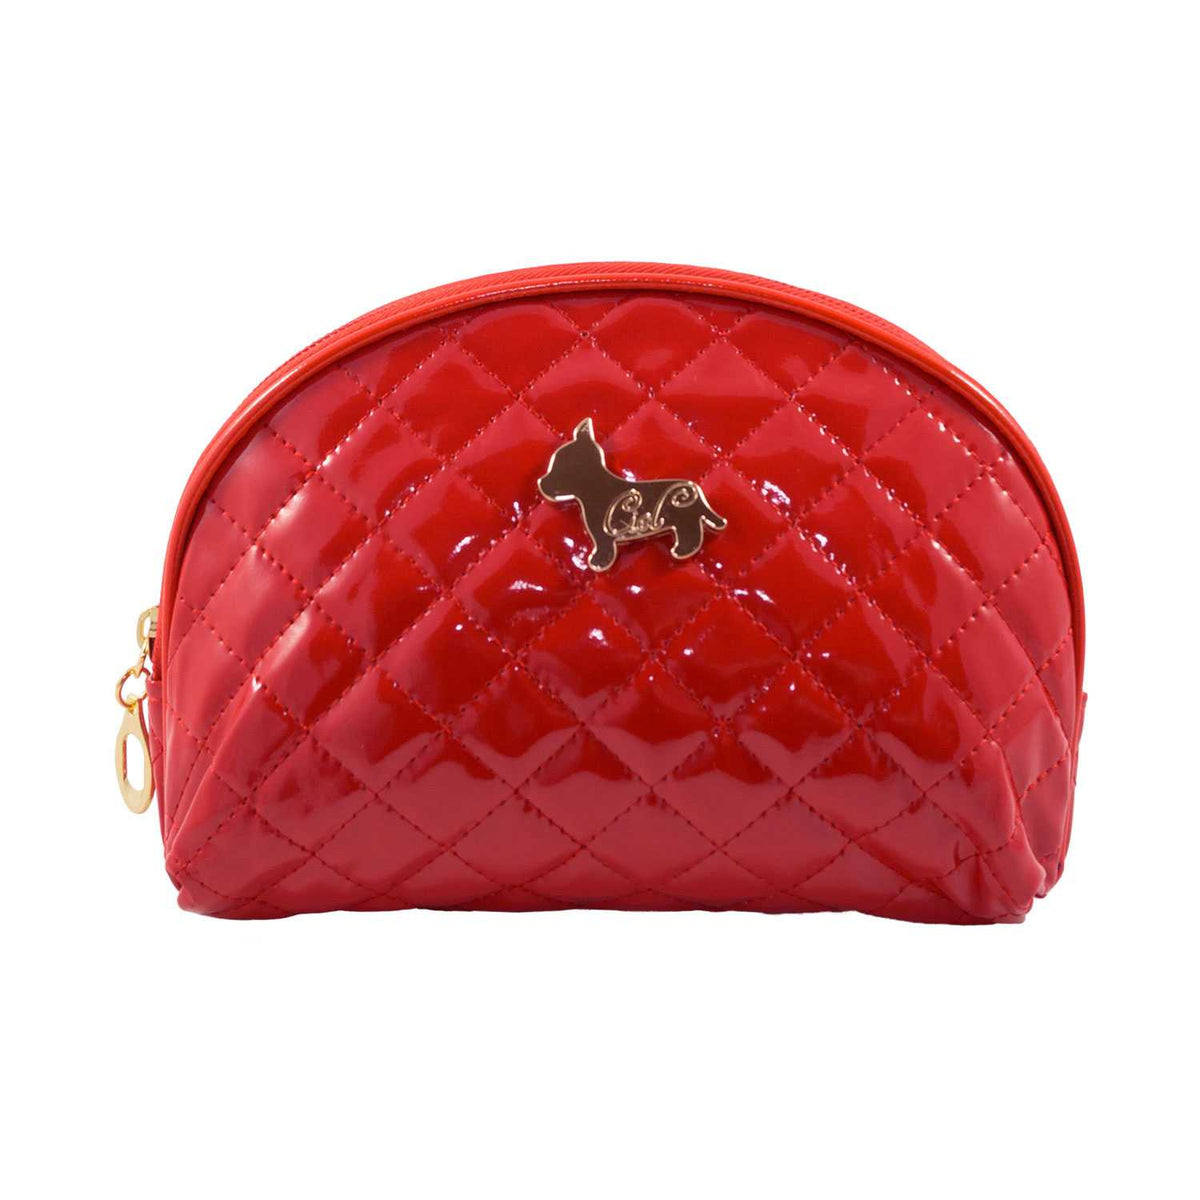 Shiny Half Moon Shape Cosmetic Pouch Bag - Red - Zestique